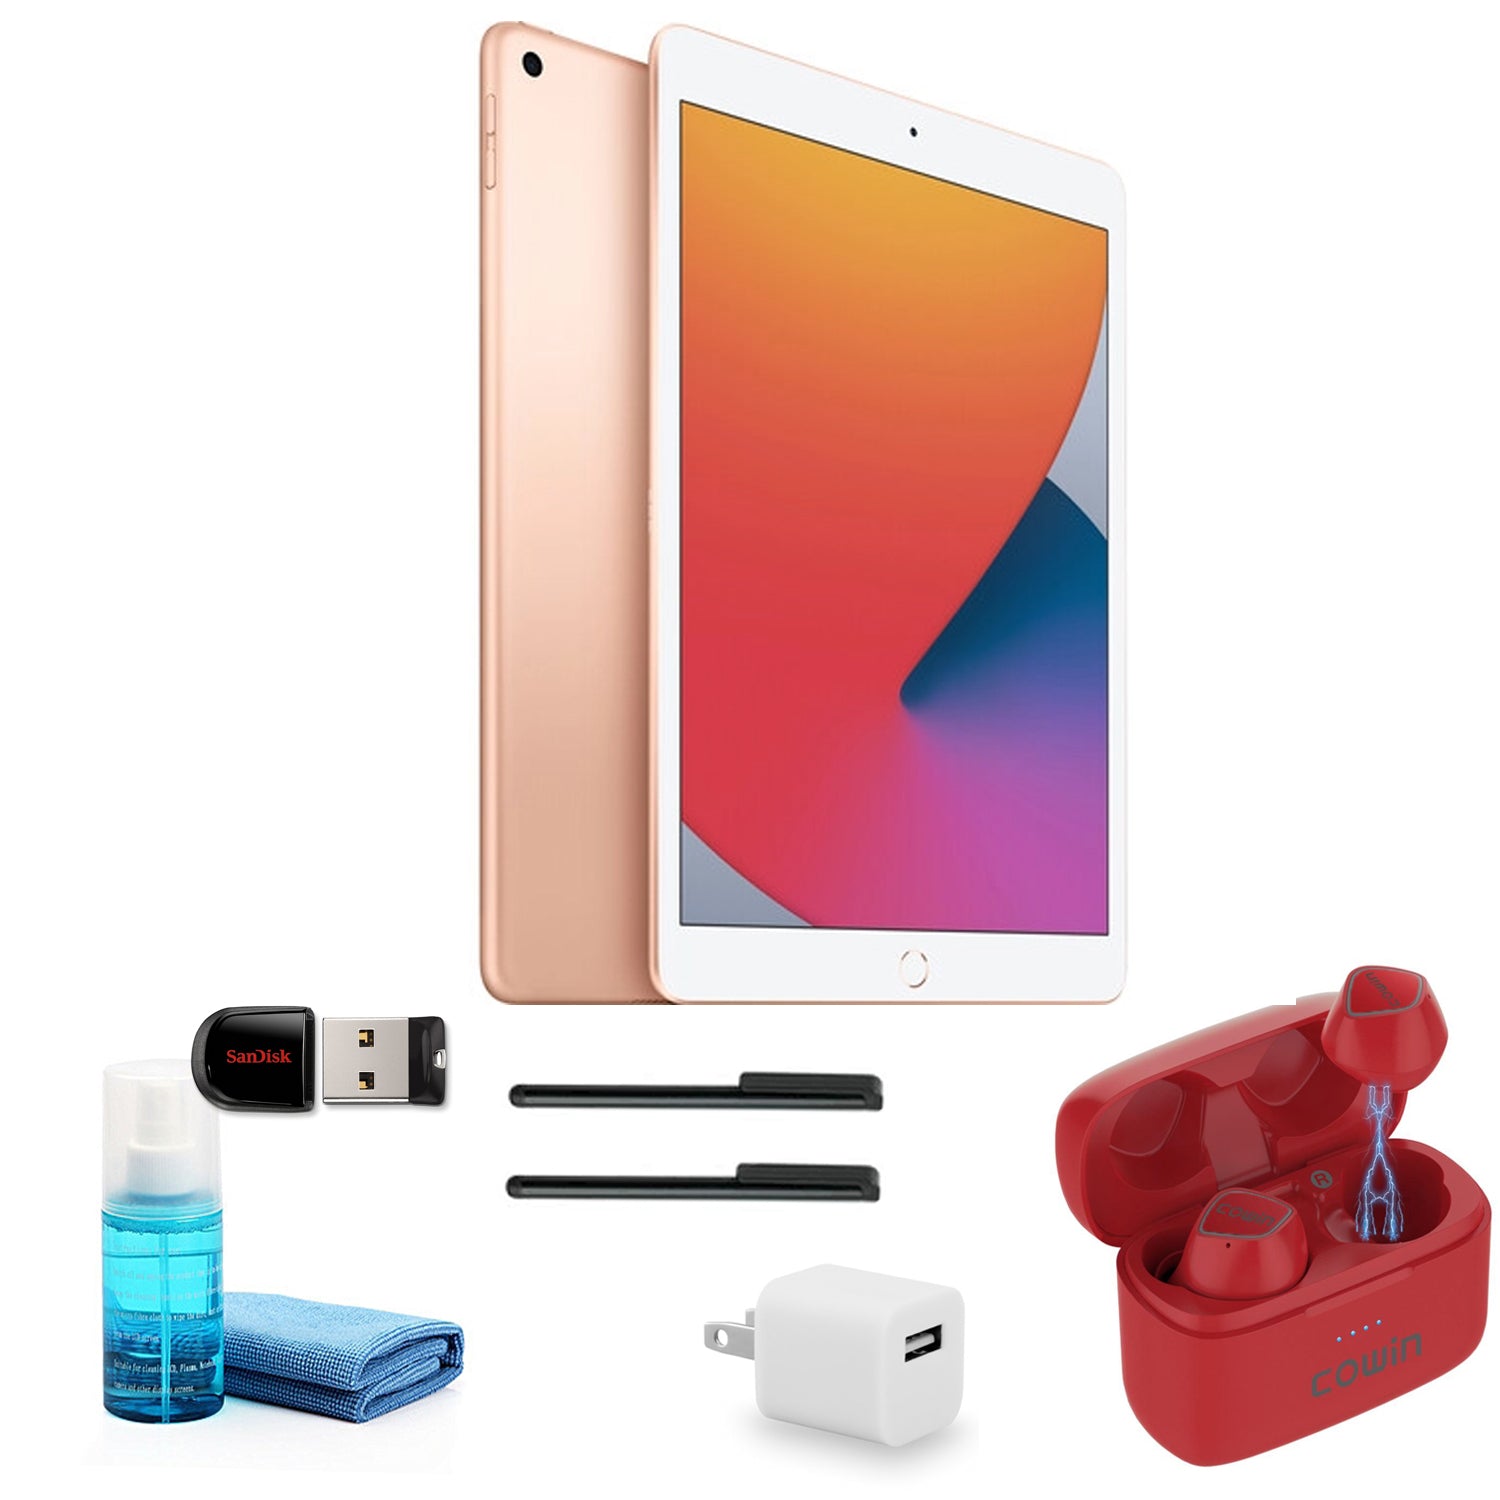 Apple iPad 10.2 Inch (128GB, Gold, MYLF2LL/A) with Red Earbuds and more